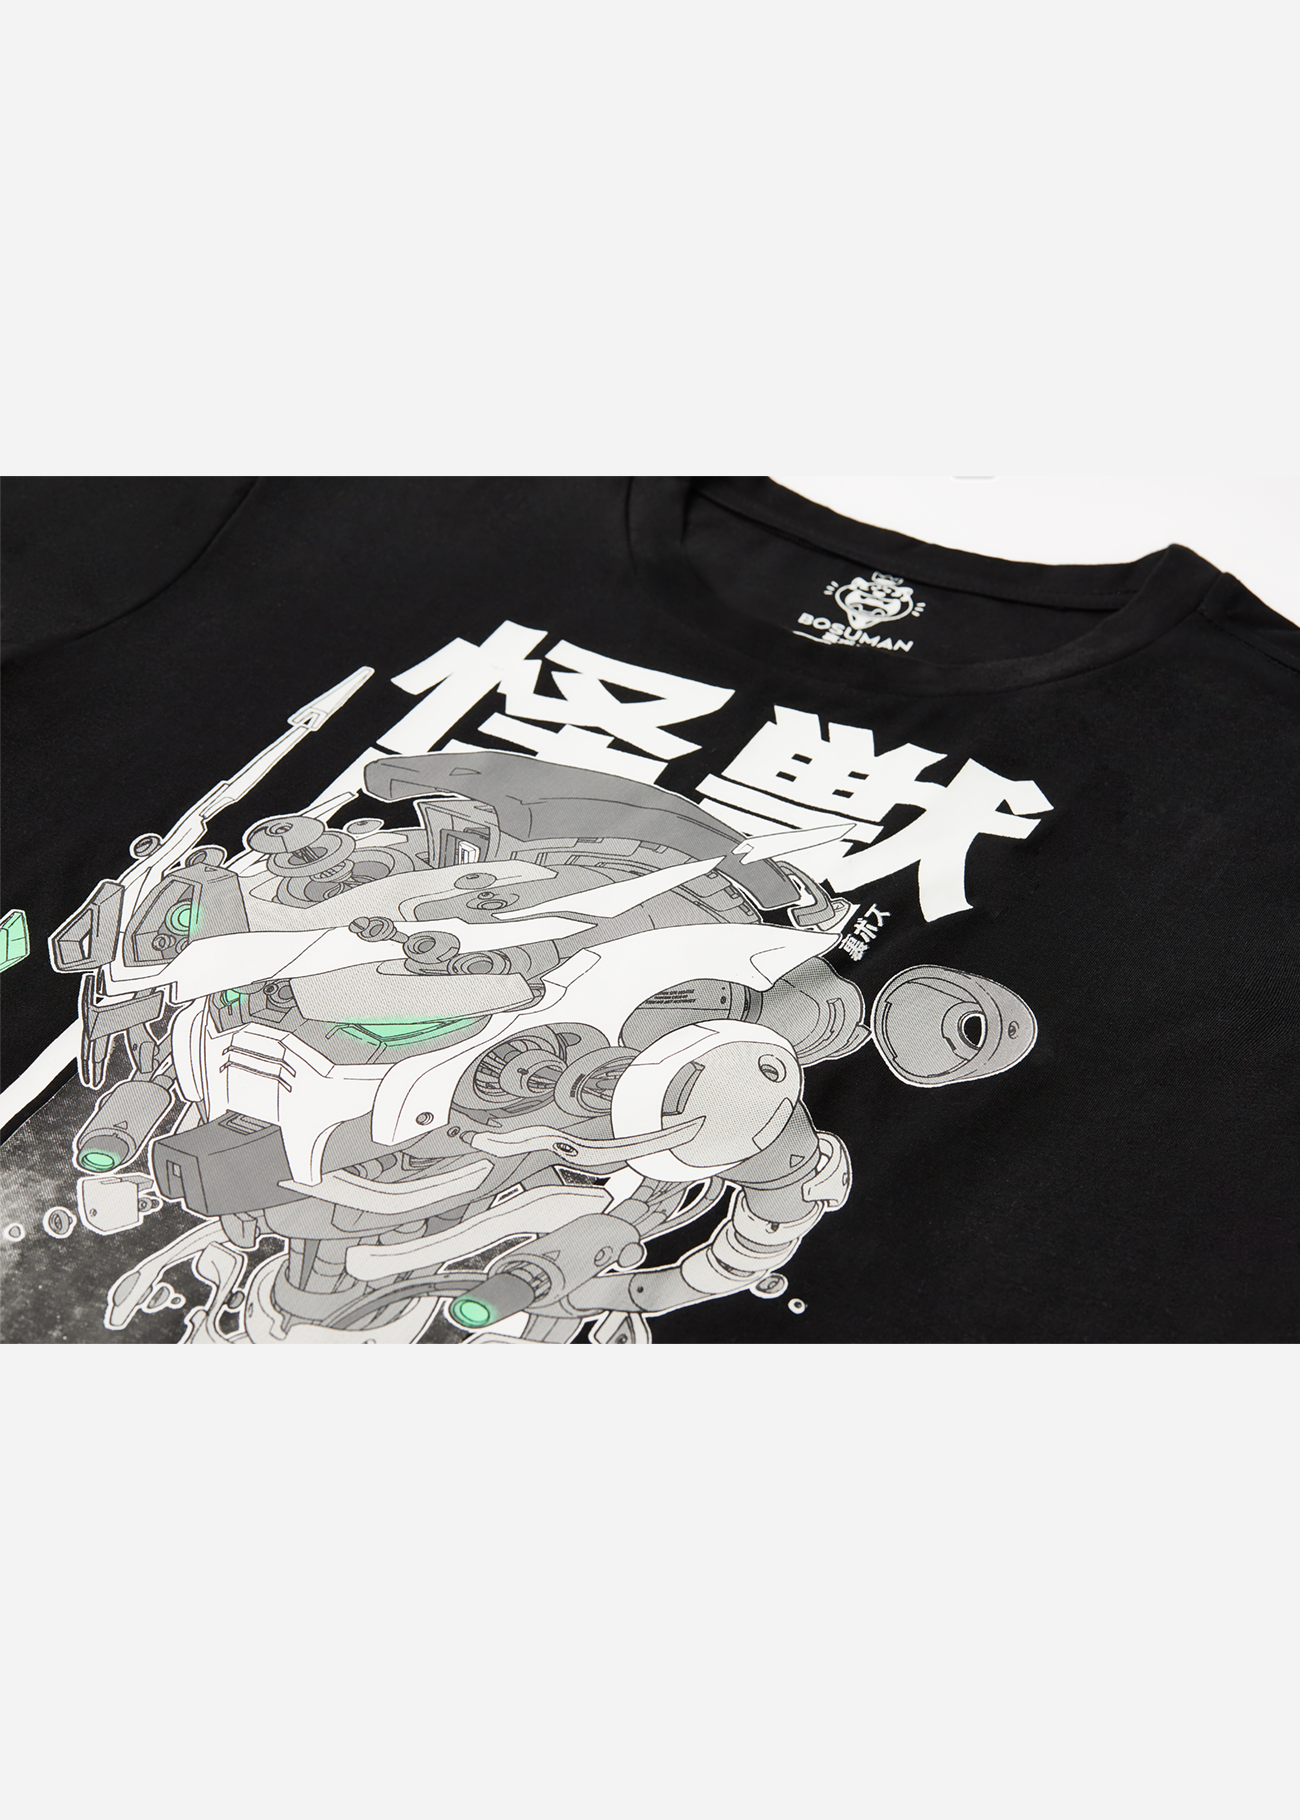 A front facing photo of a mecha anime figure head, floating in space. Premium anime tshirt